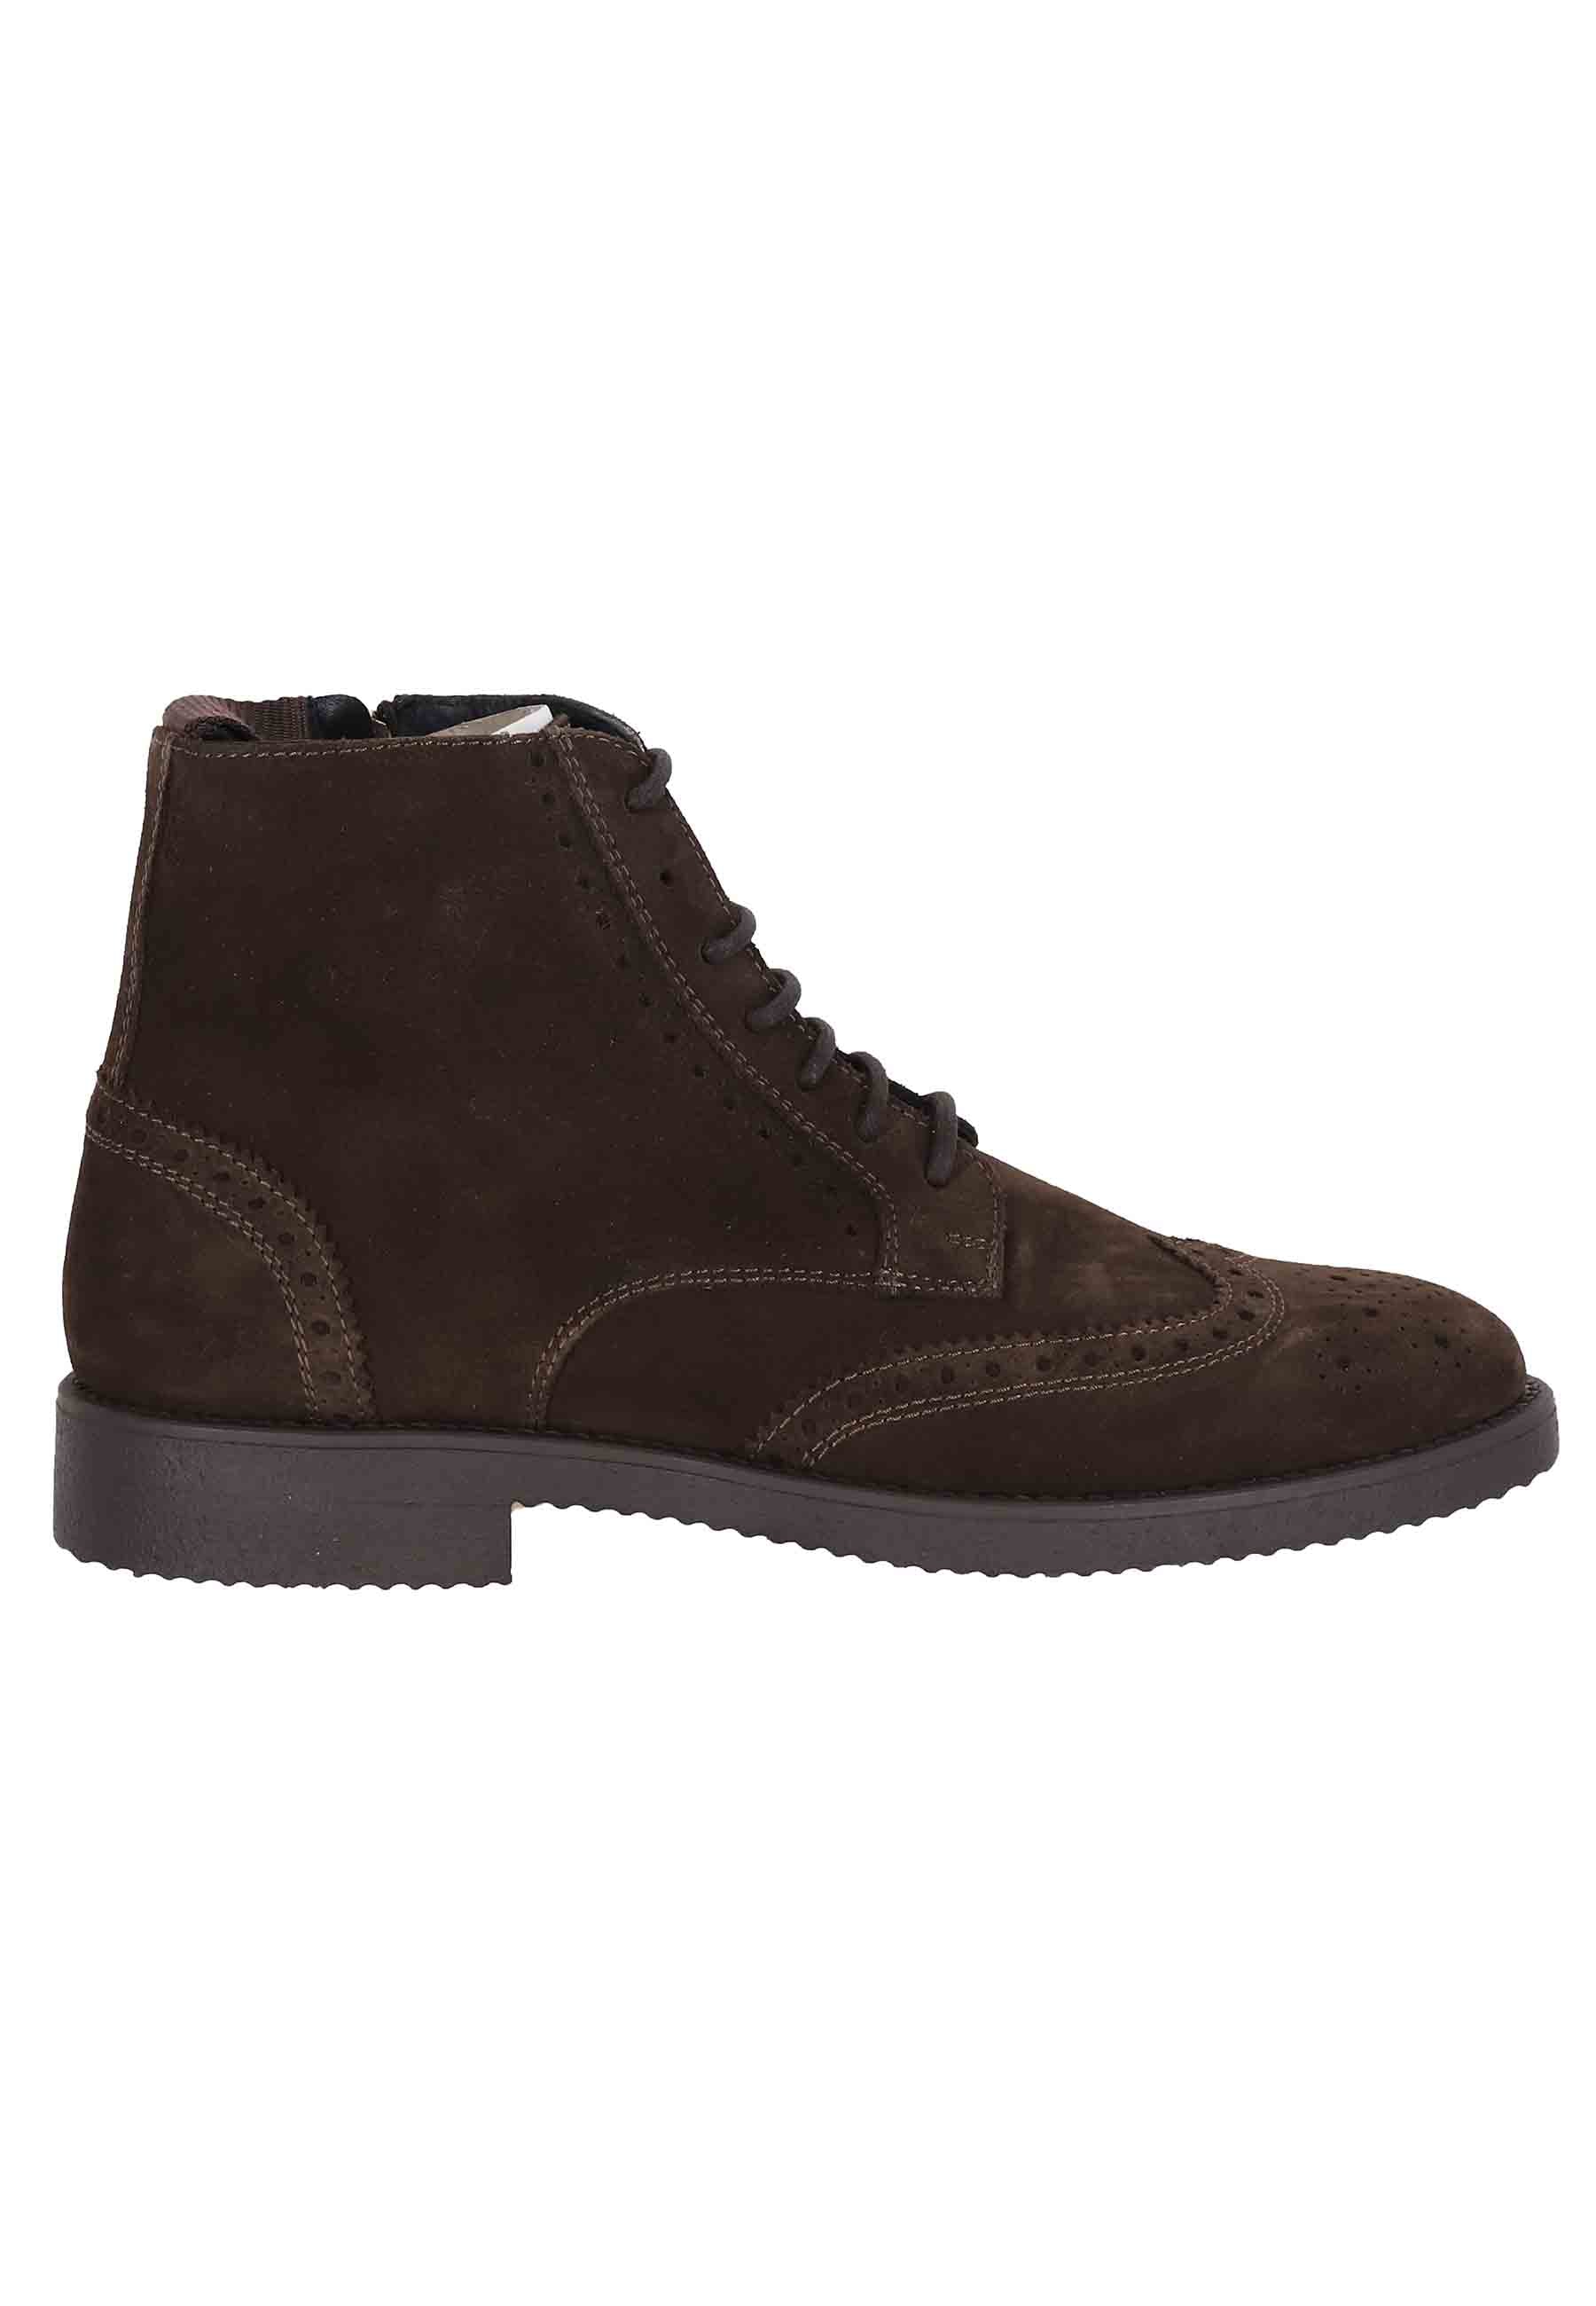 Men's ankle boots in dark brown suede with stitching and crepe sole